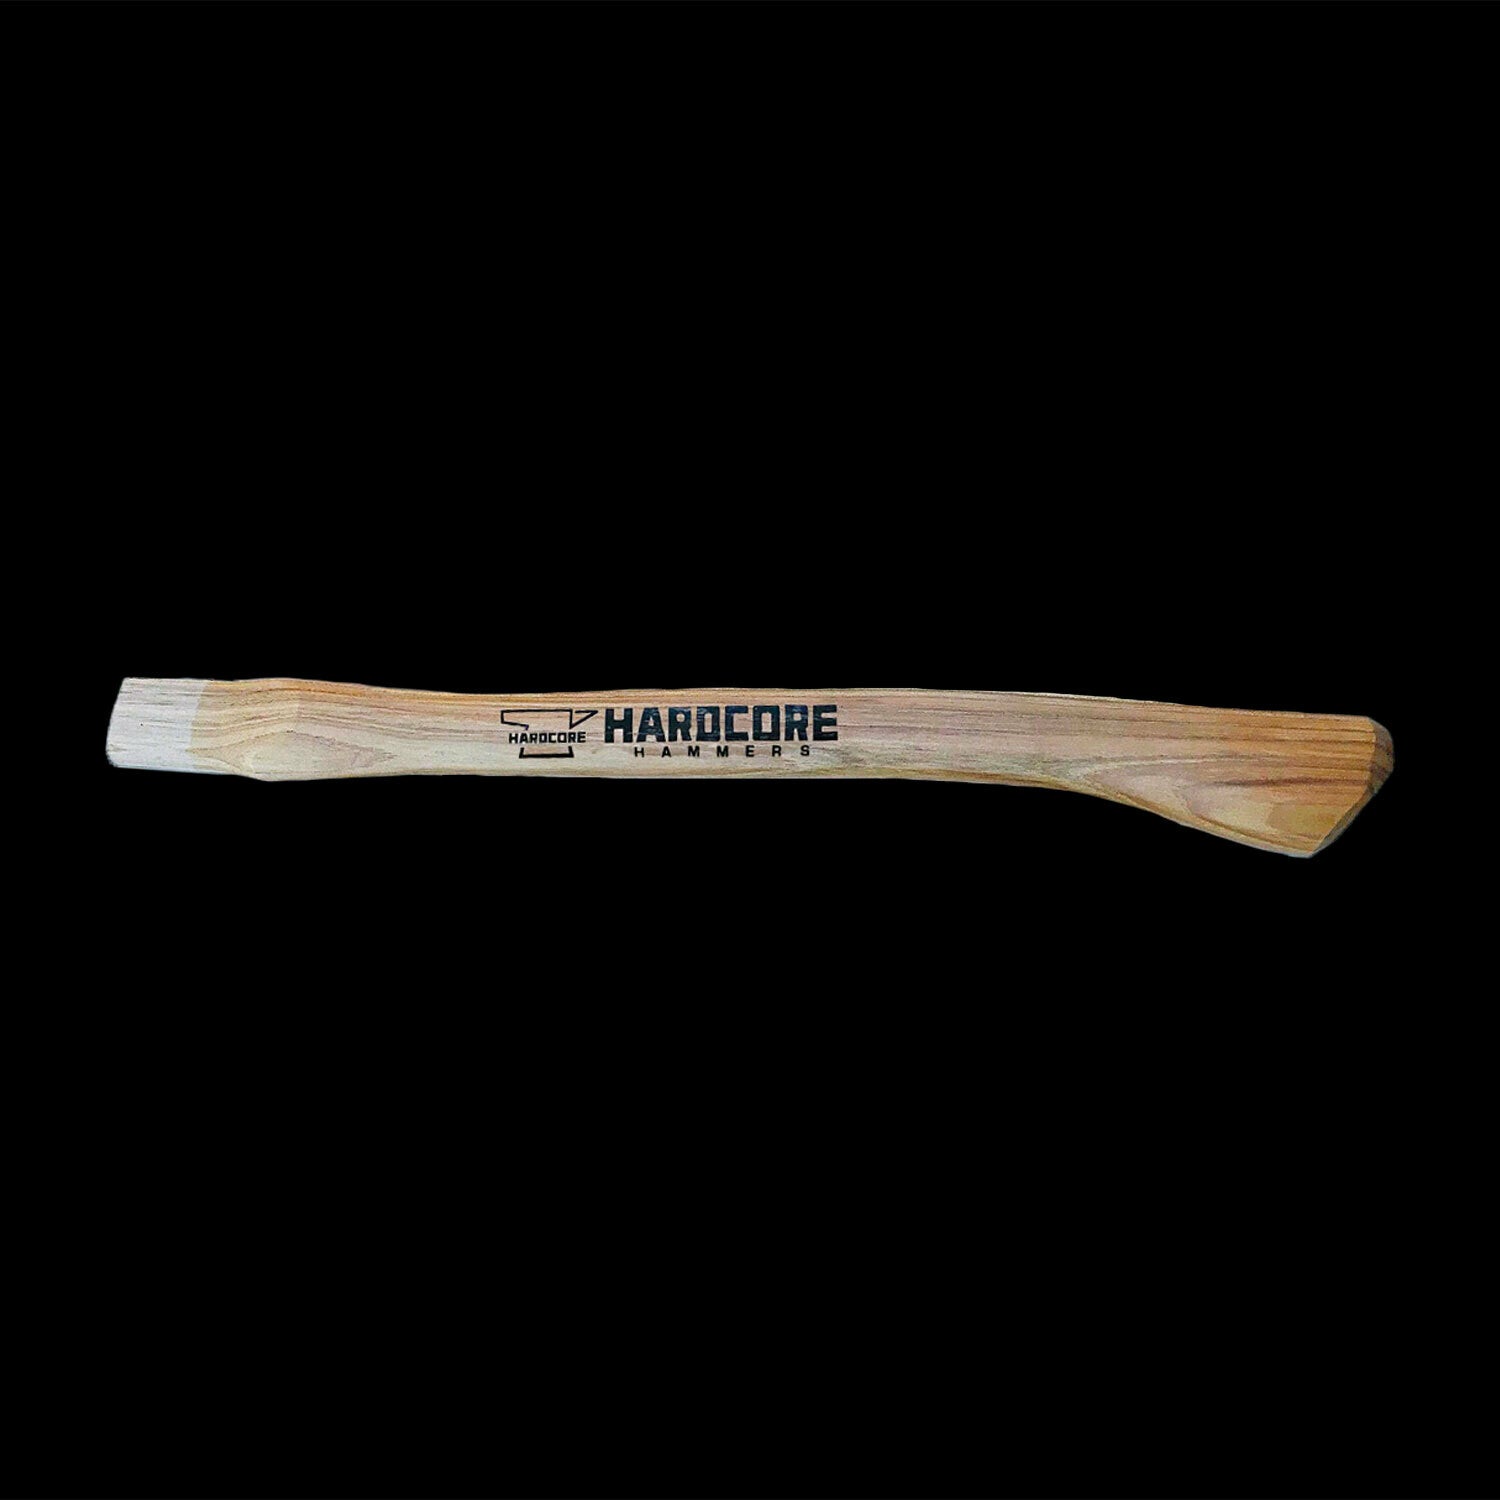 Length - 18 inches, 100% American Hickory replacement hammer handle is available from Signature Tools. We ship Worldwide so get your dream gears today! 